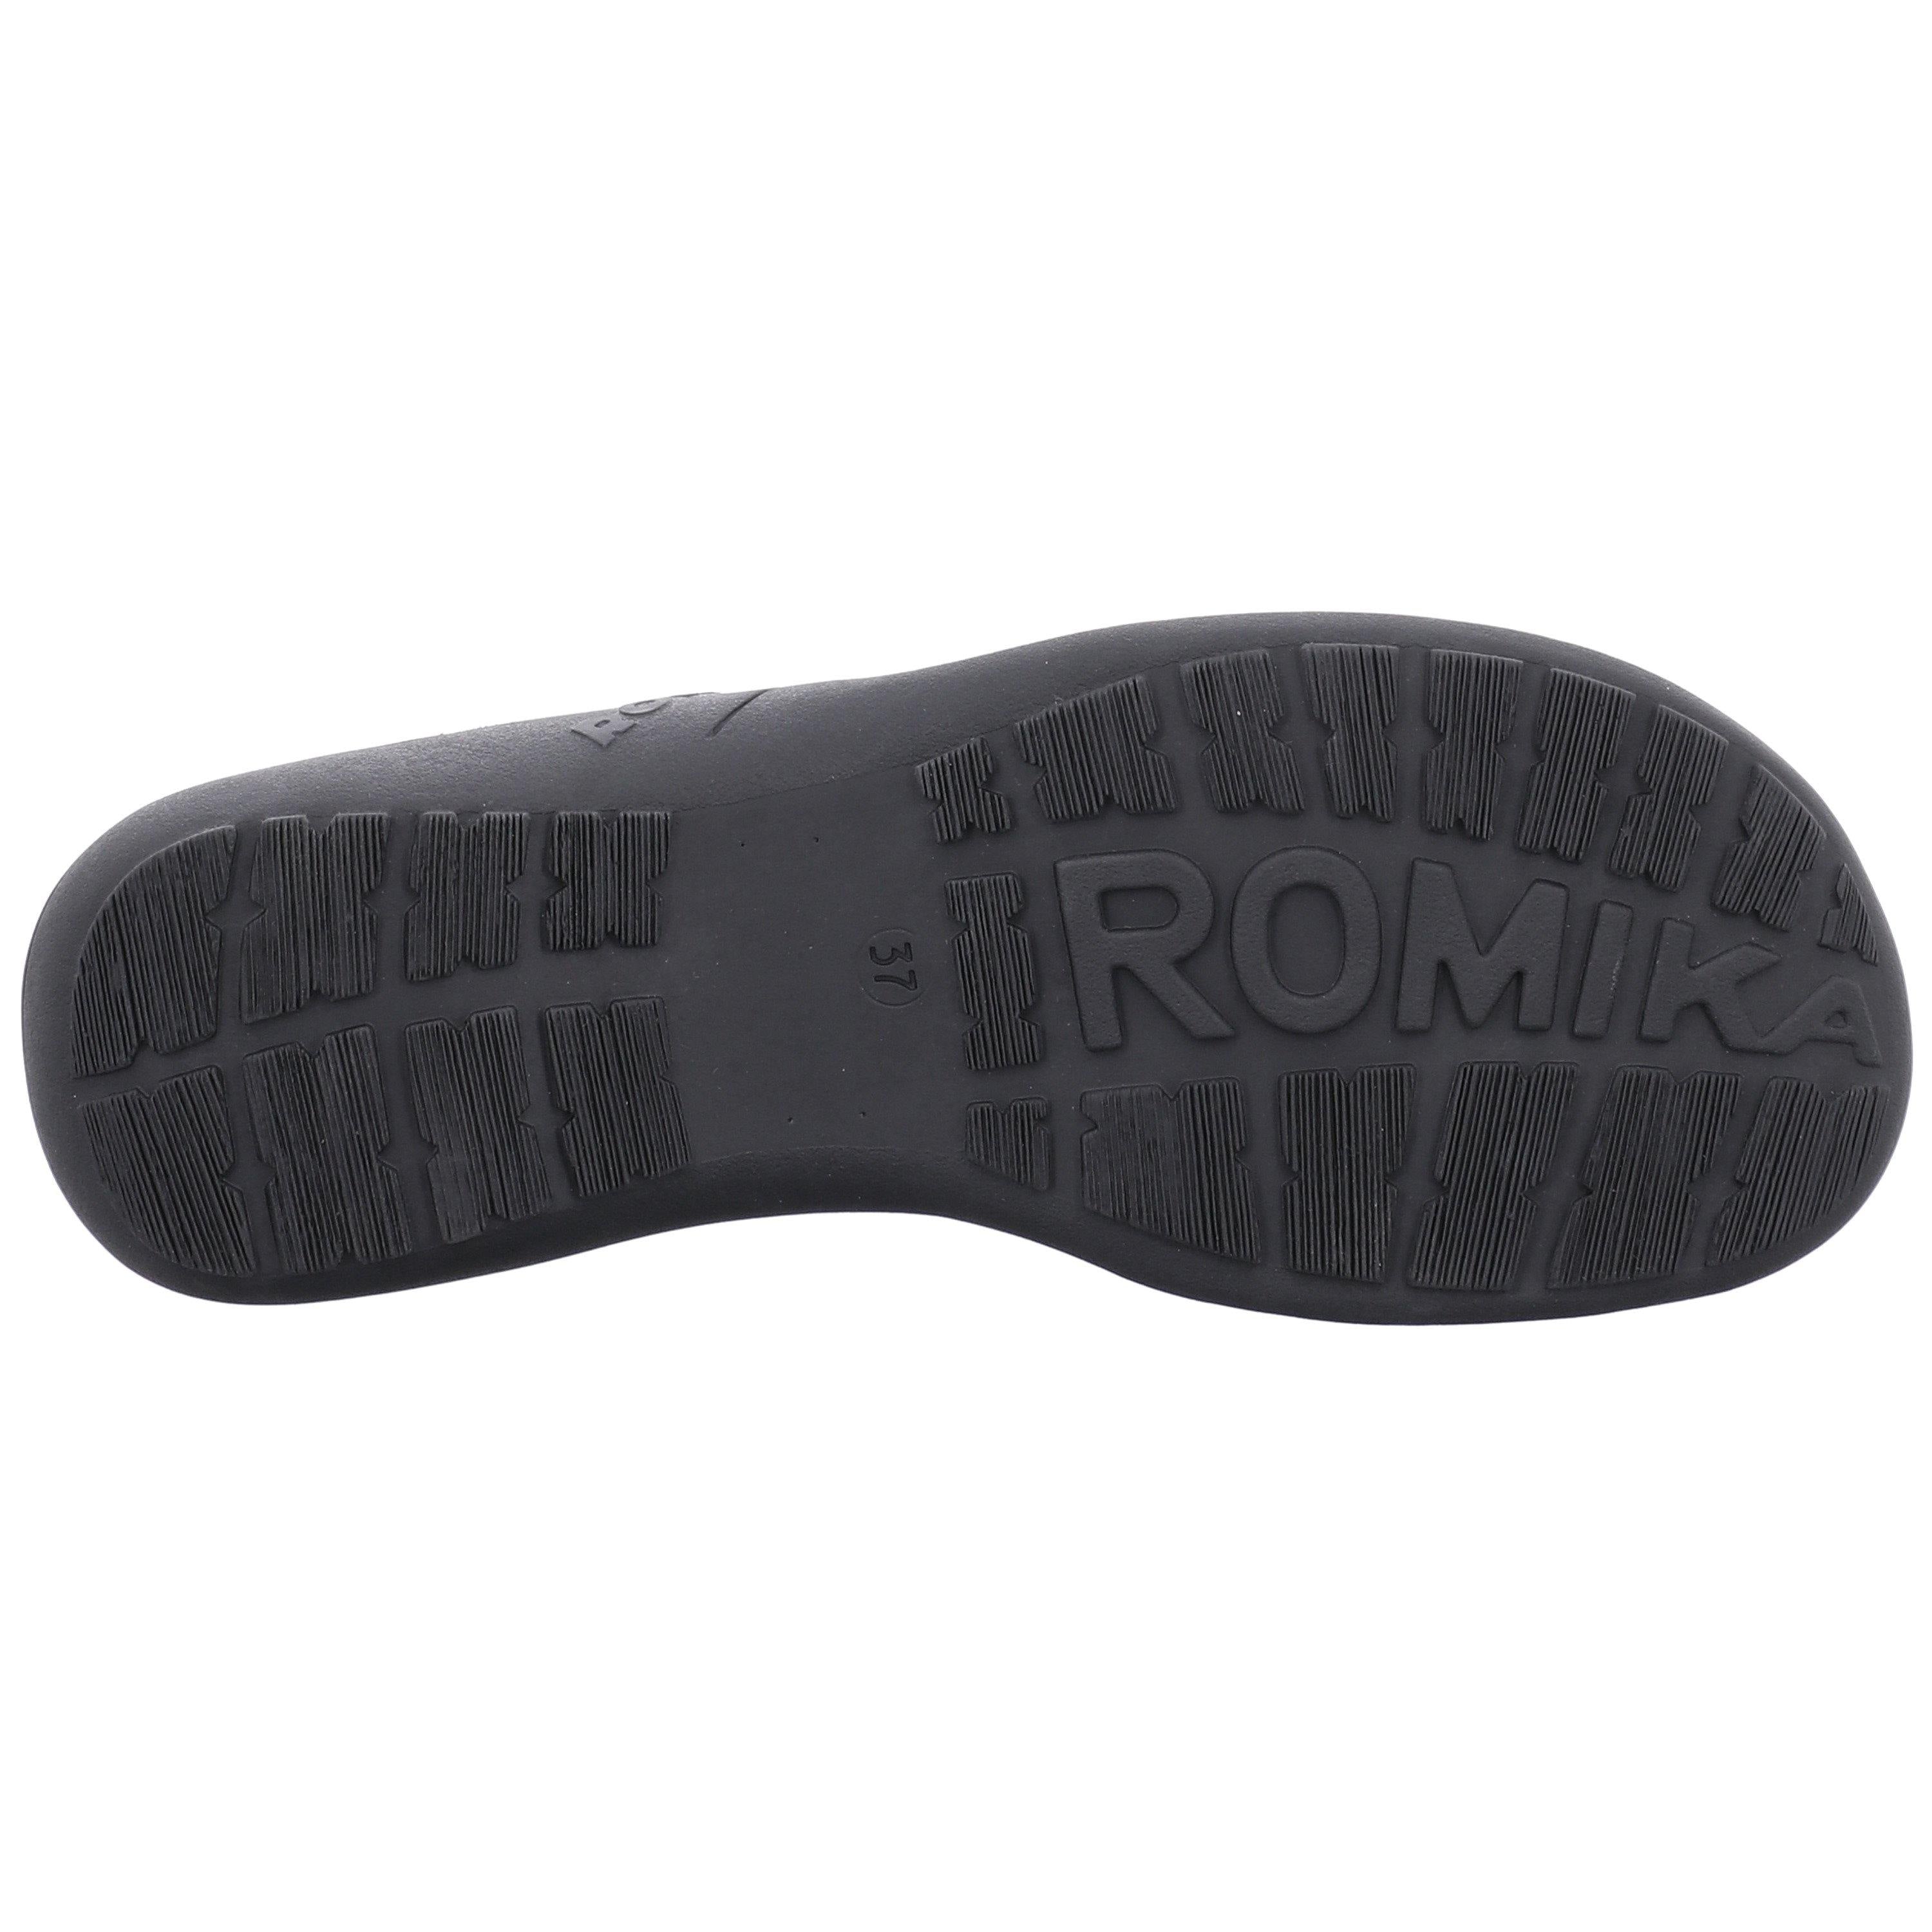 Clog style MILLA 131 by Romika USA